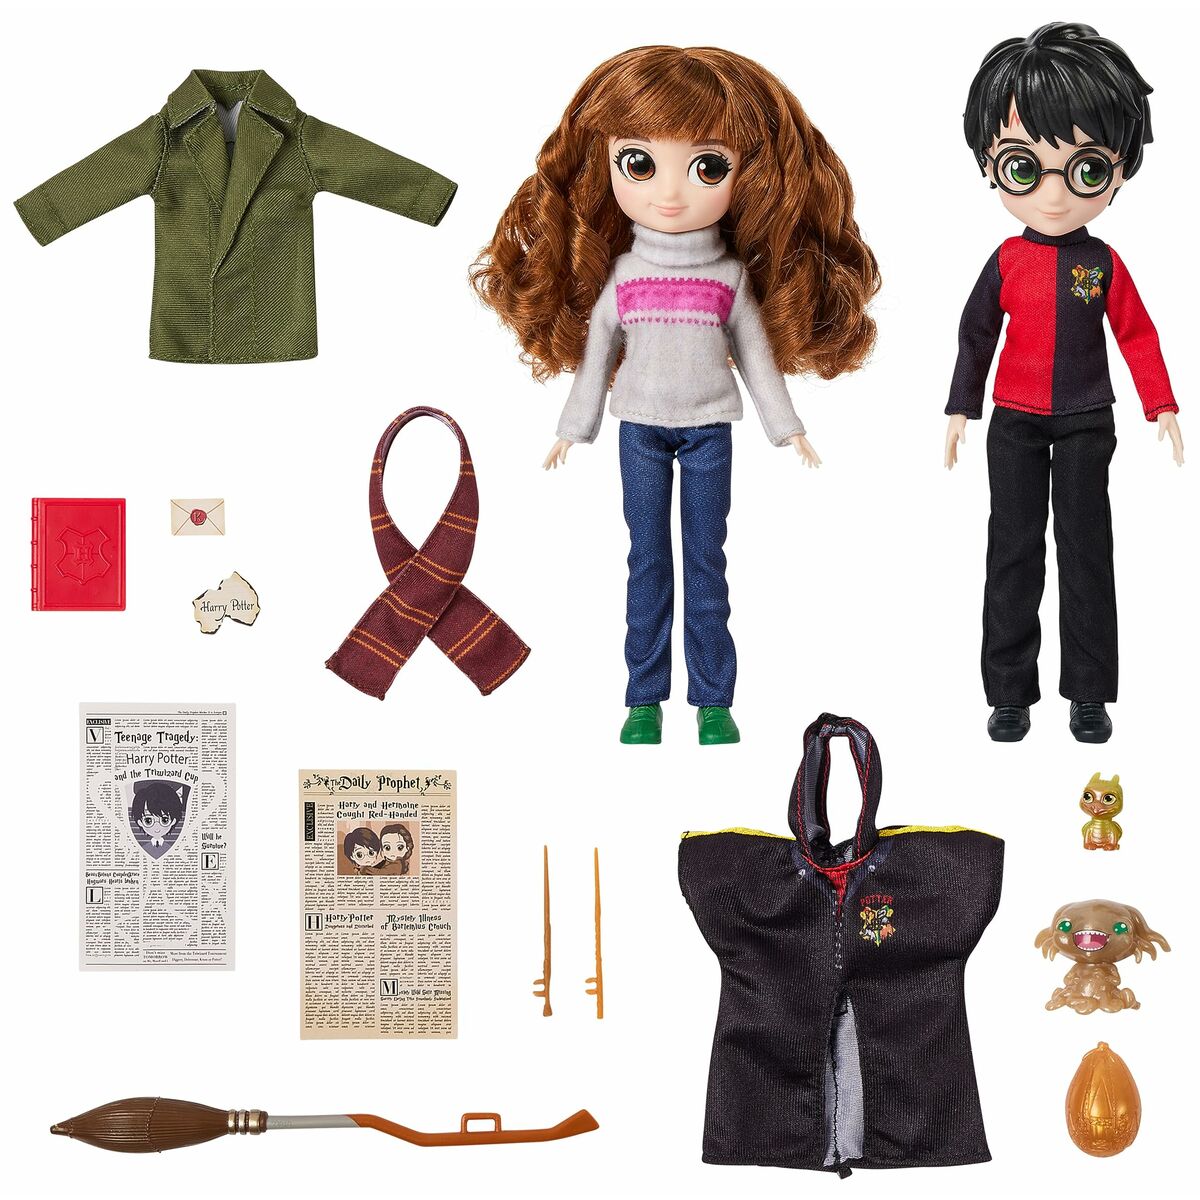 Playset Spin Master HArry Potter & Hermione Granger Accessori